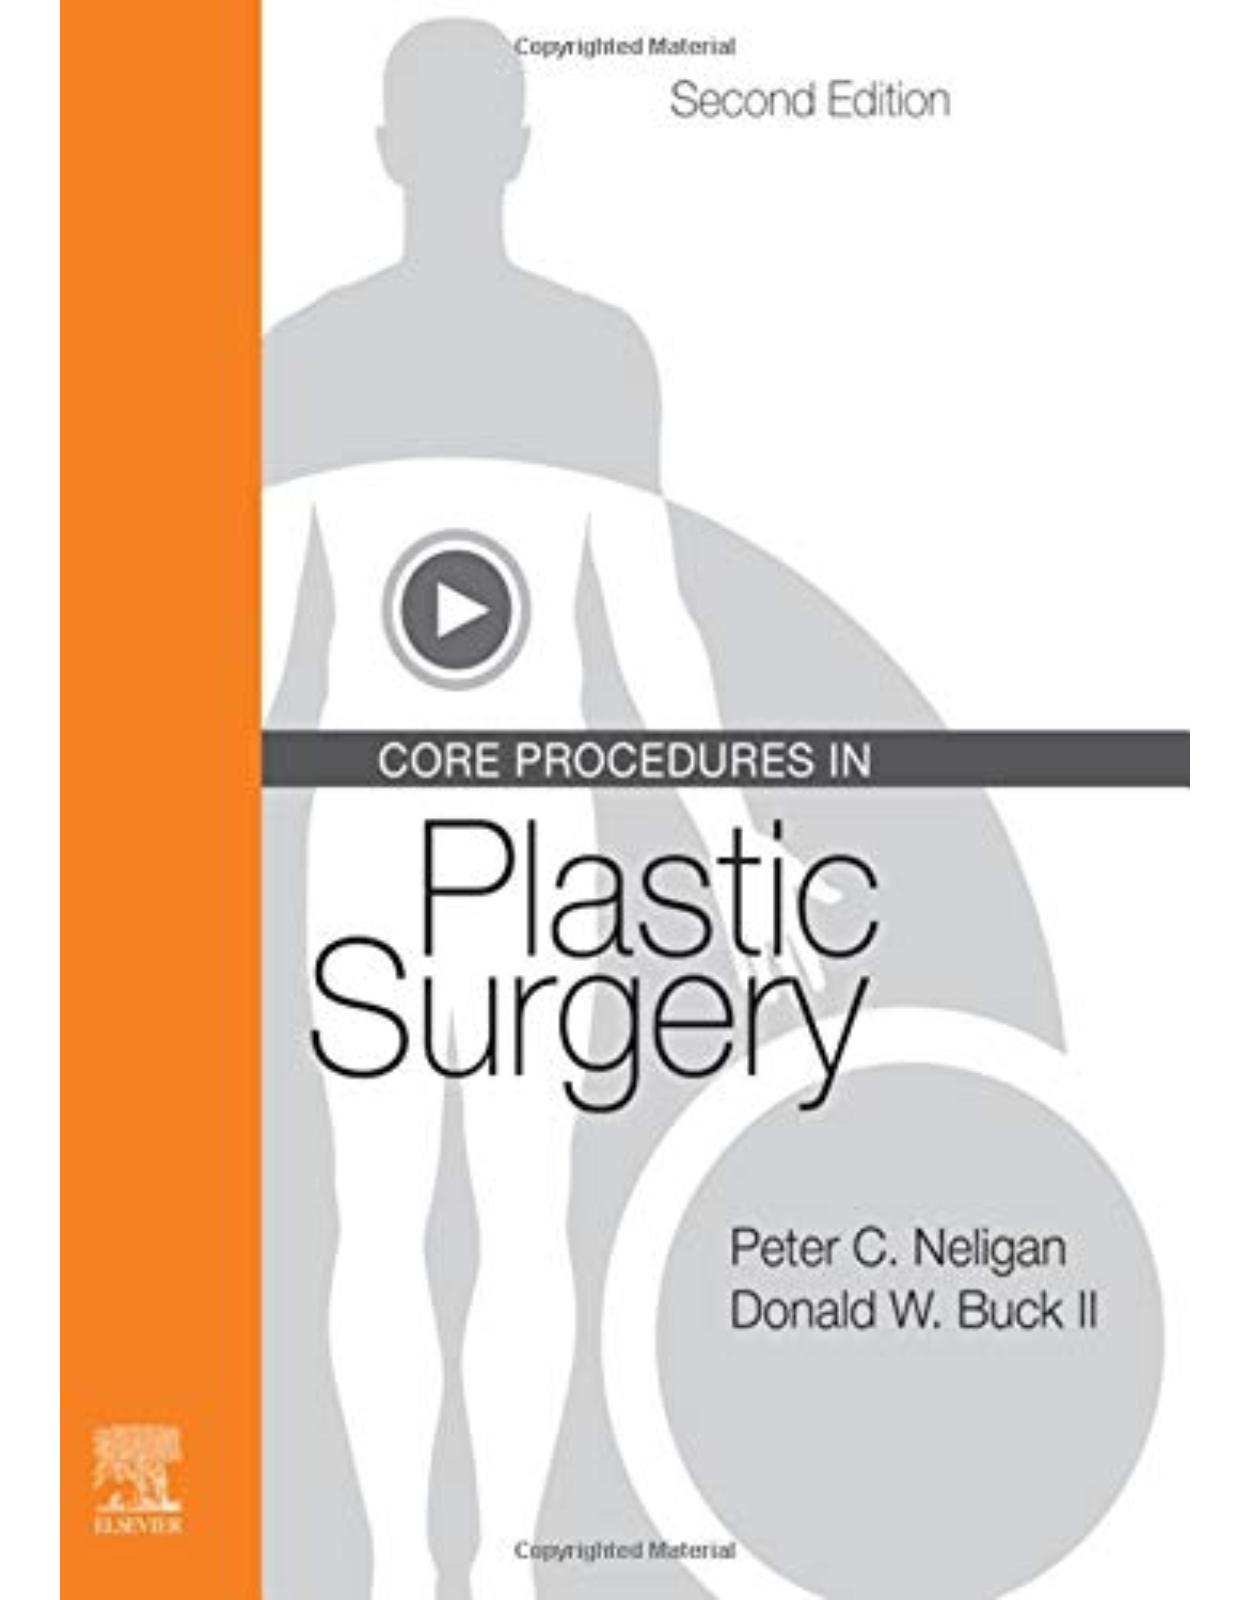 Core Procedures in Plastic Surgery, 2nd Edition